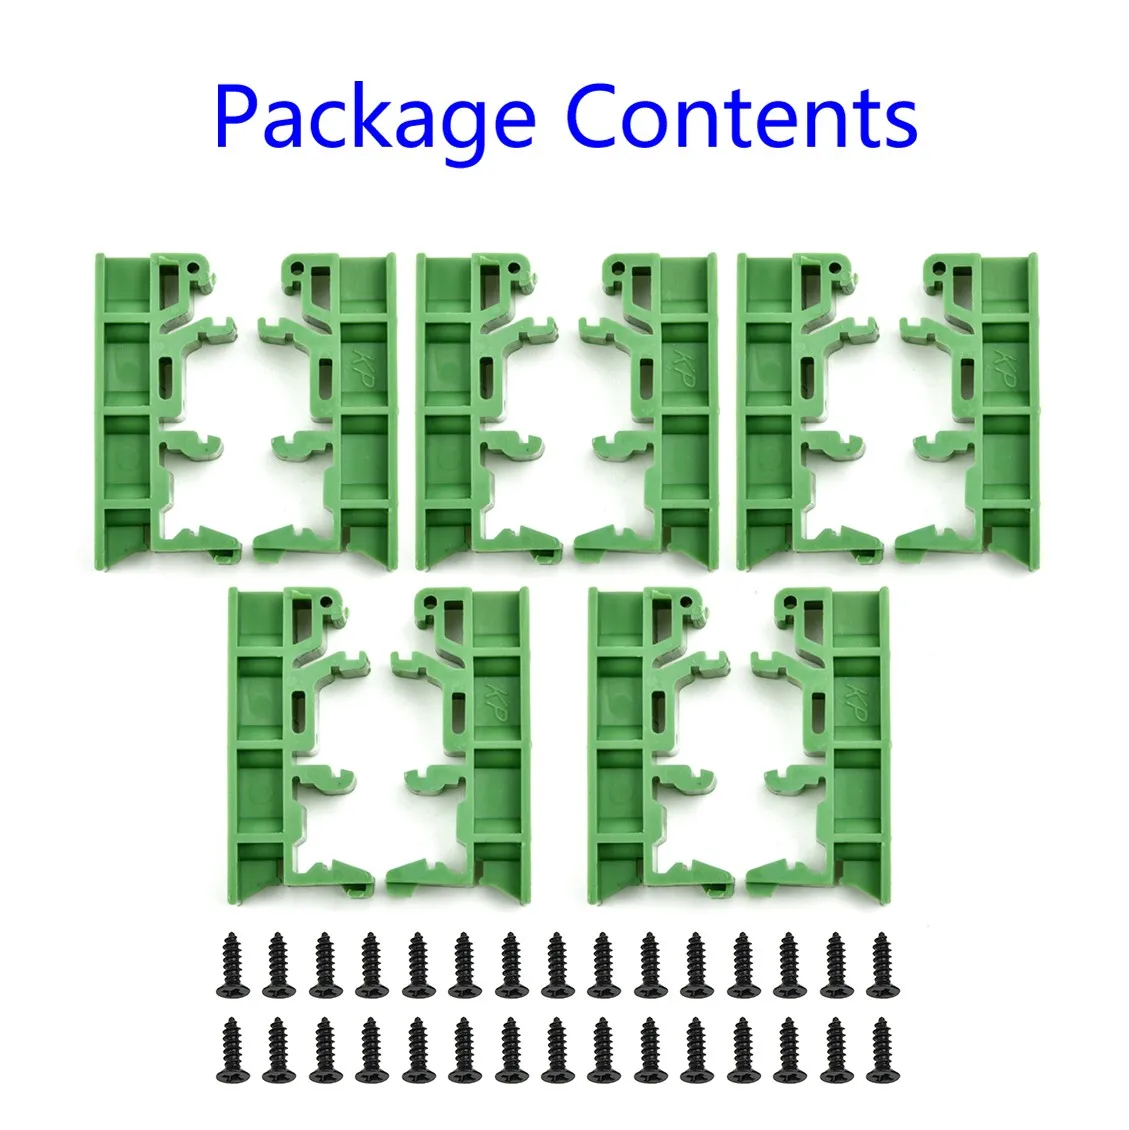 

2019 Hot 5 Set Of PCB Mounting Brackets With 20 Screws DRG-01 Green Plastic 4.2x1x1.8cm Fit For DIN 35 Mounting Rails